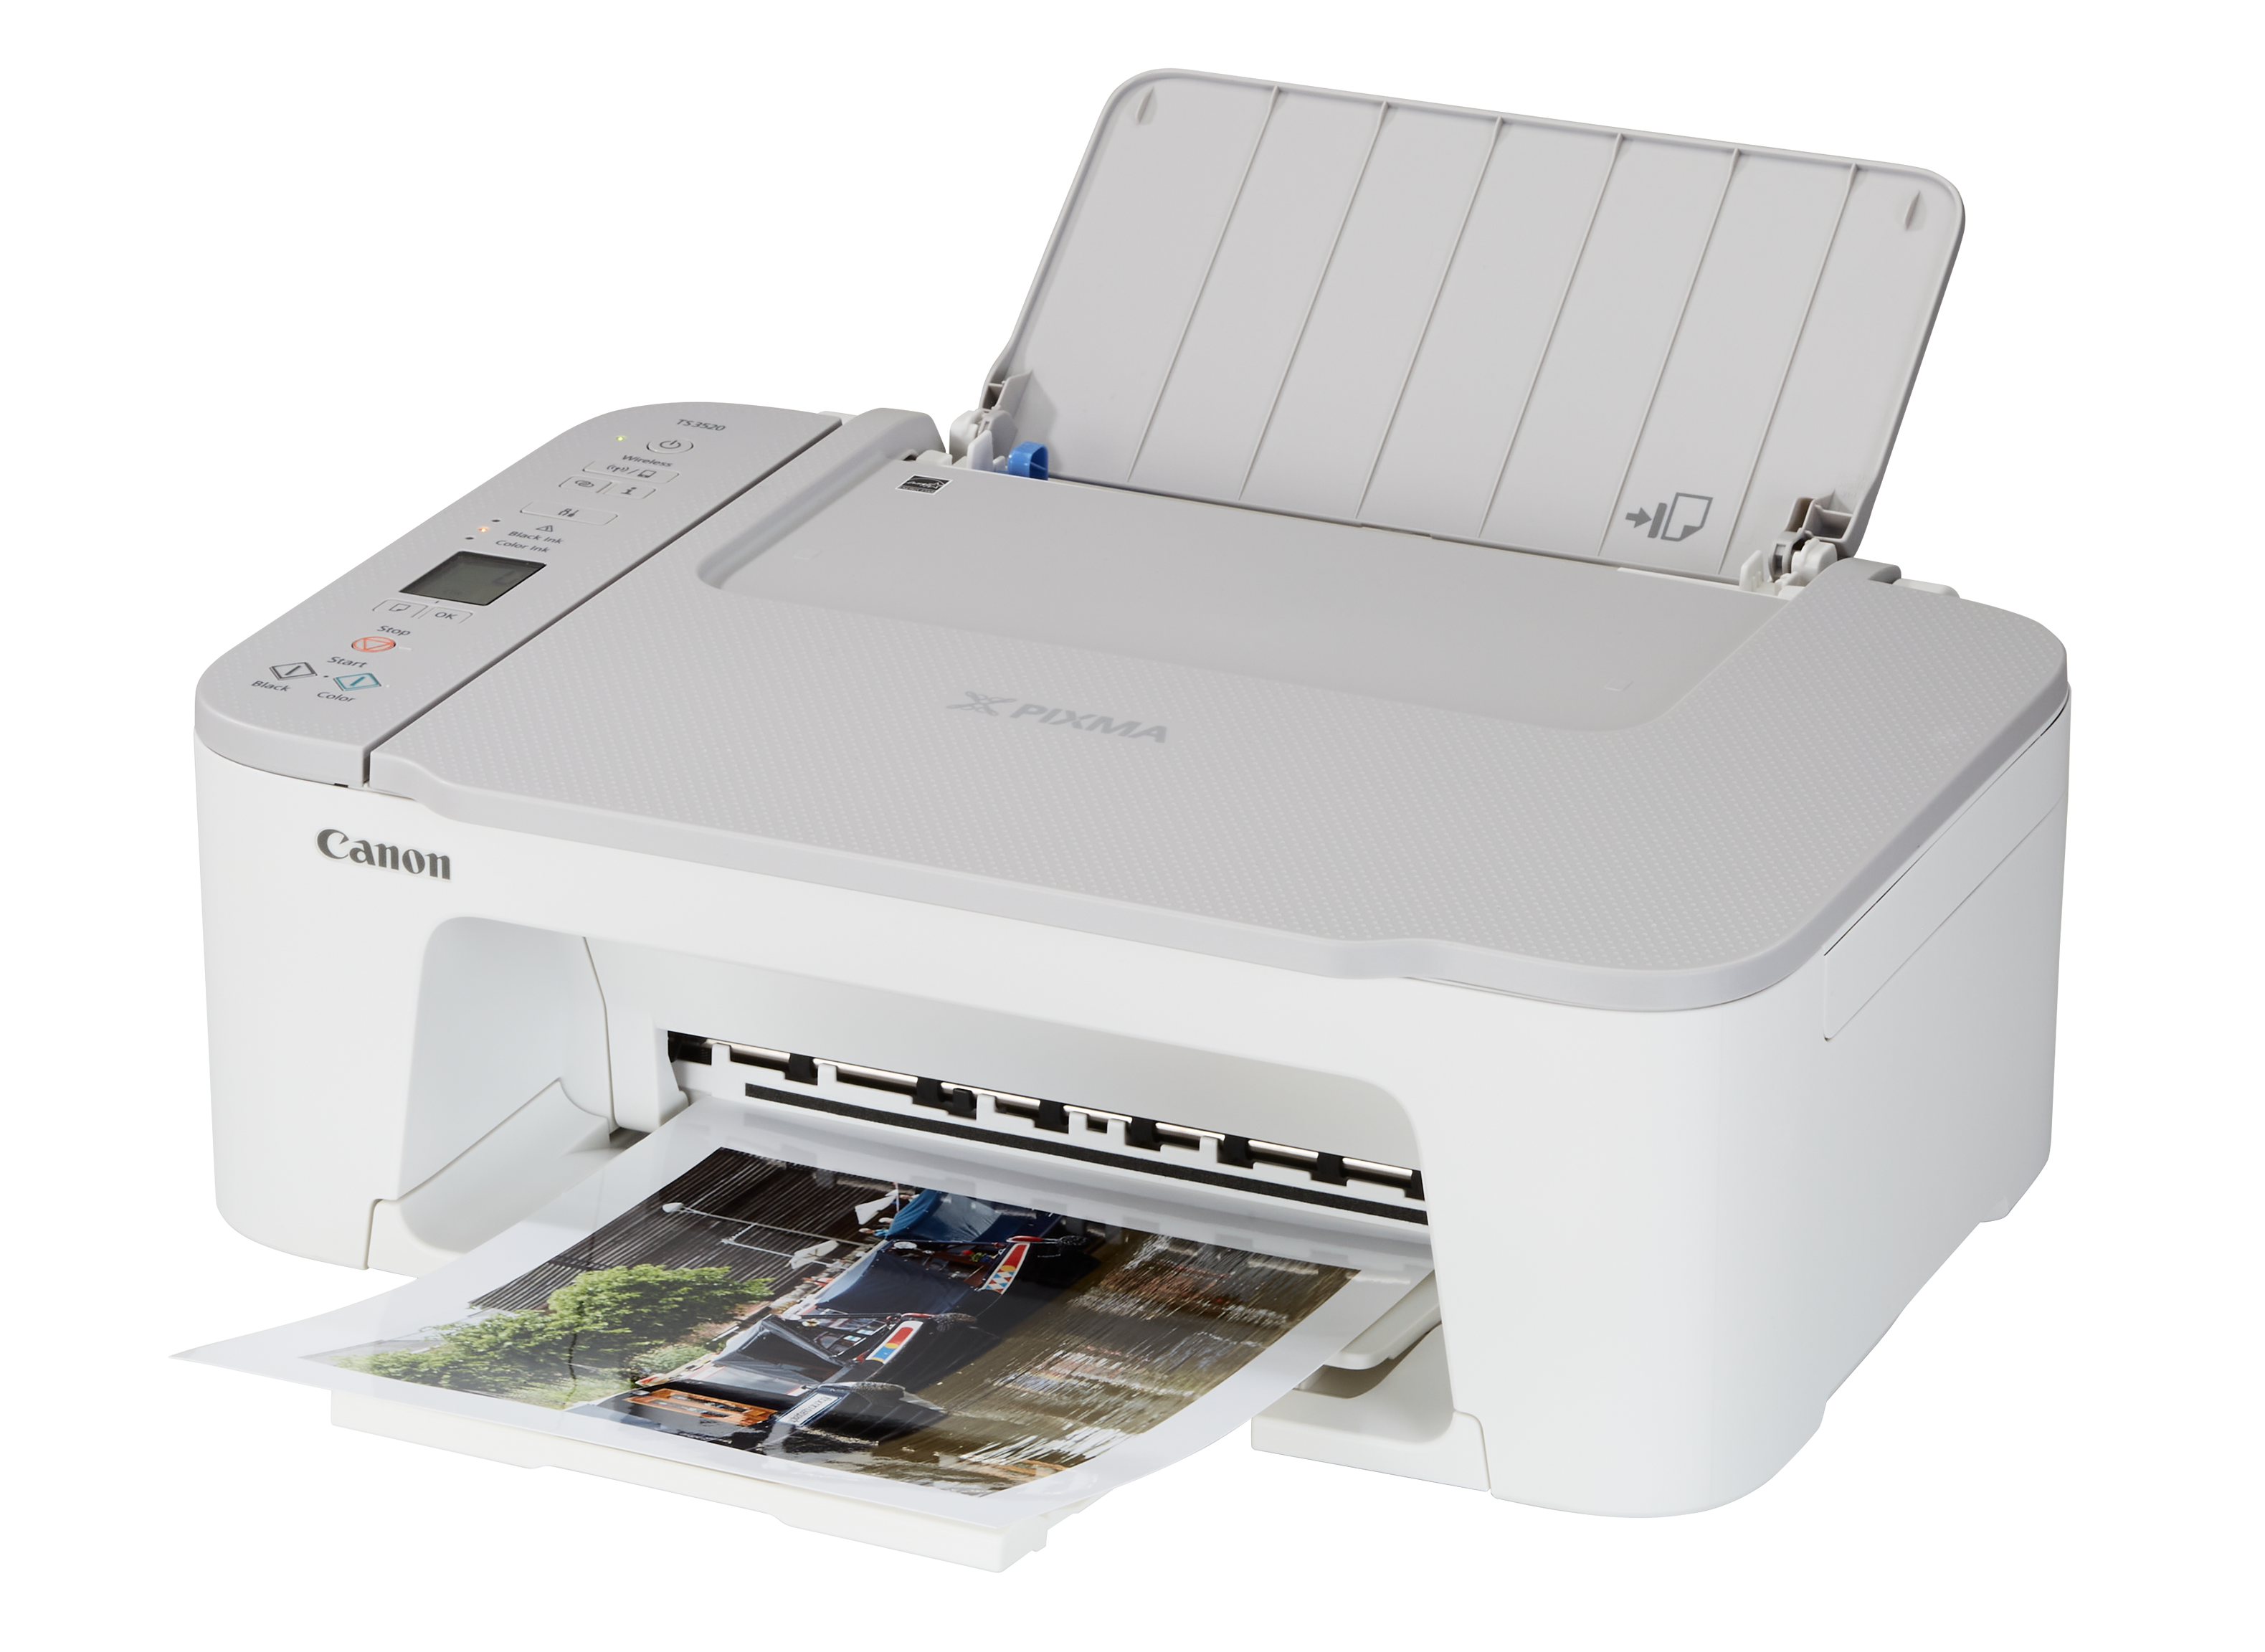 https://crdms.images.consumerreports.org/prod/products/cr/models/403949-all-in-one-inkjet-printers-canon-pixma-ts3520-10022123.png